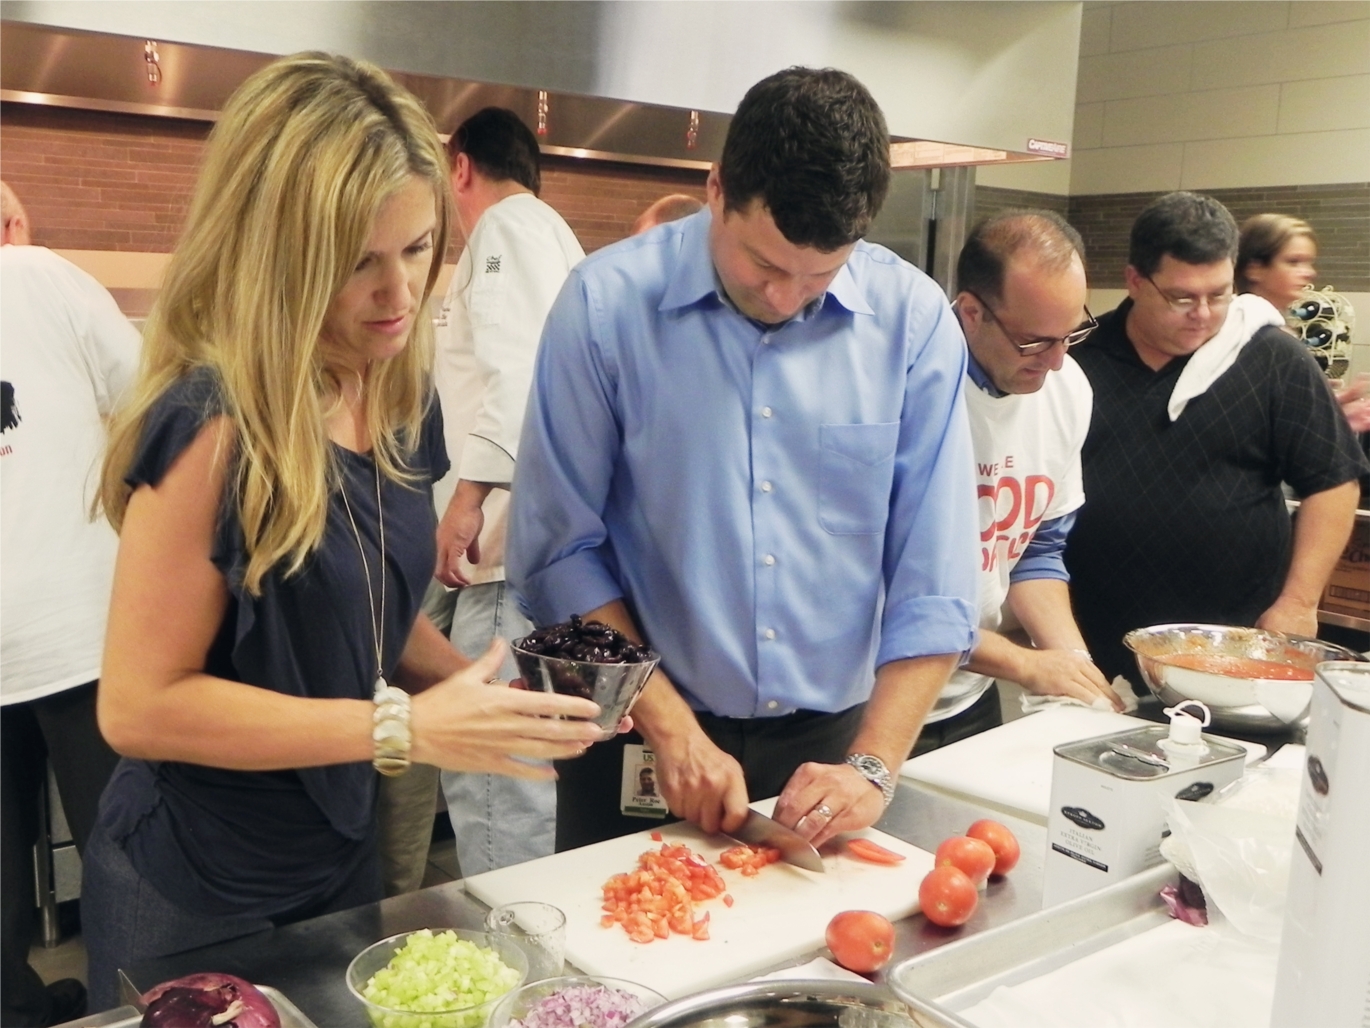 At US Foods Austin, everyone is encouraged to be a "foodie" and our sales force receives hands on training with our products.